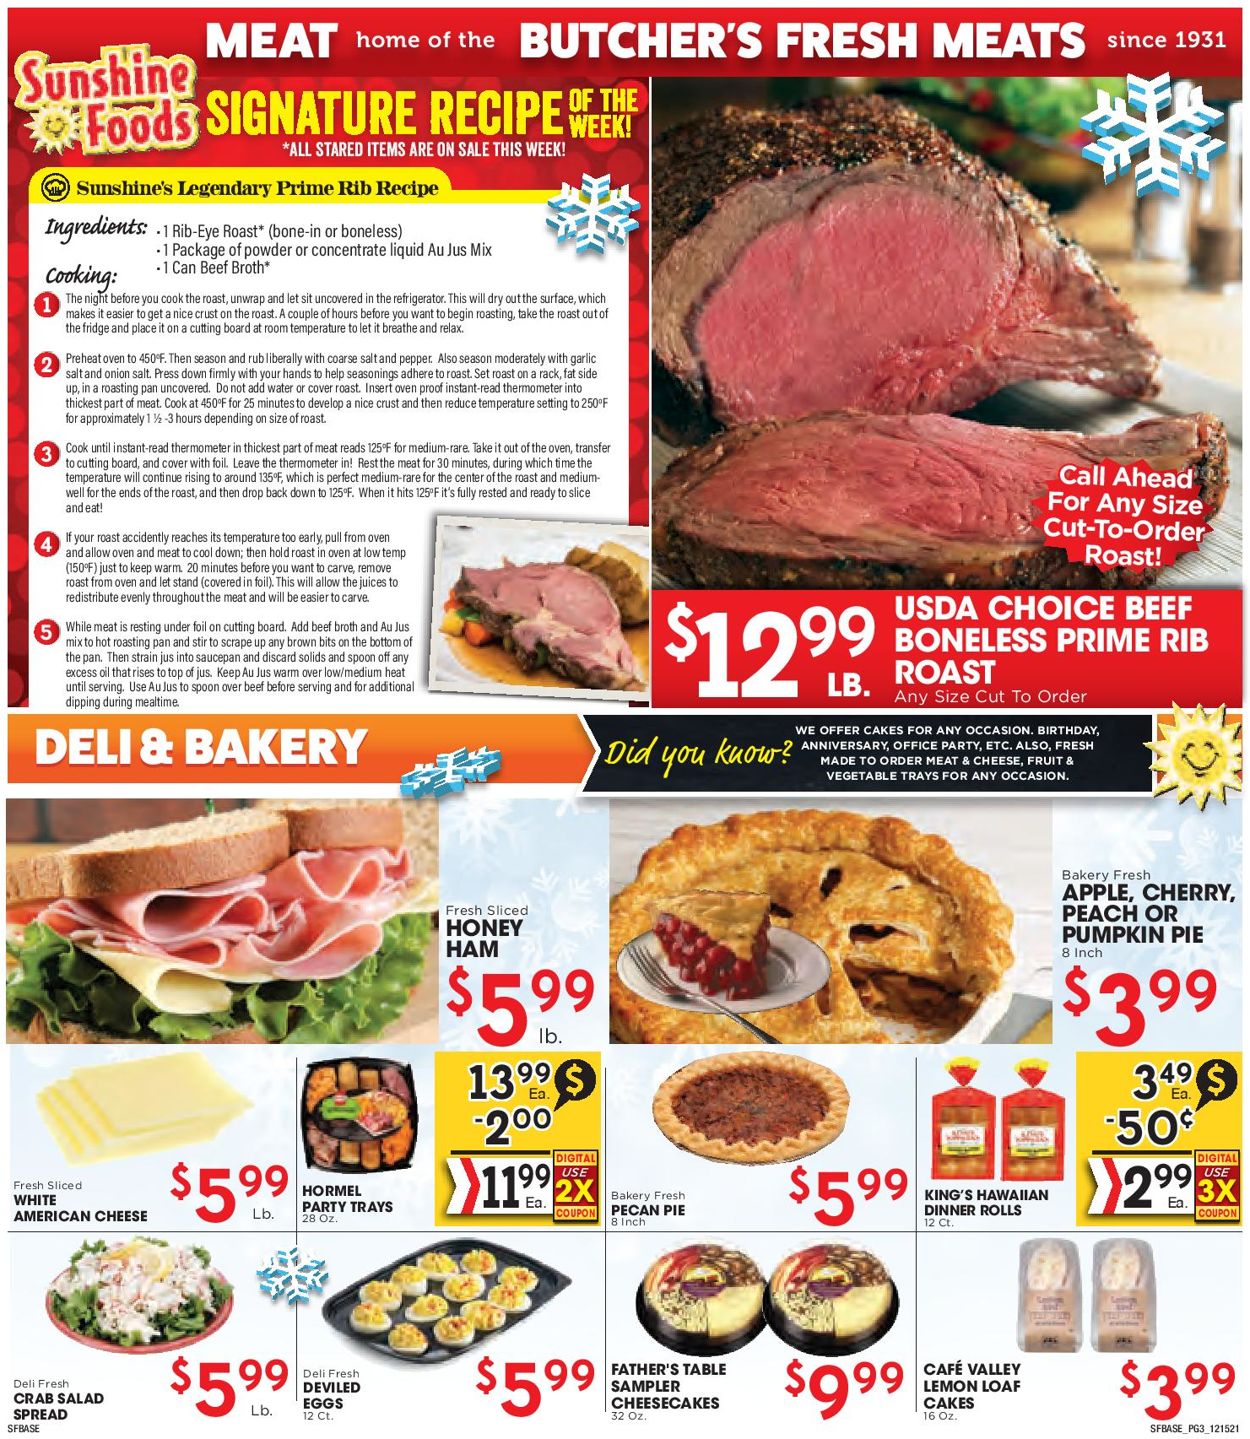 Catalogue Sunshine Foods CHRISTMAS 2021 from 12/15/2021